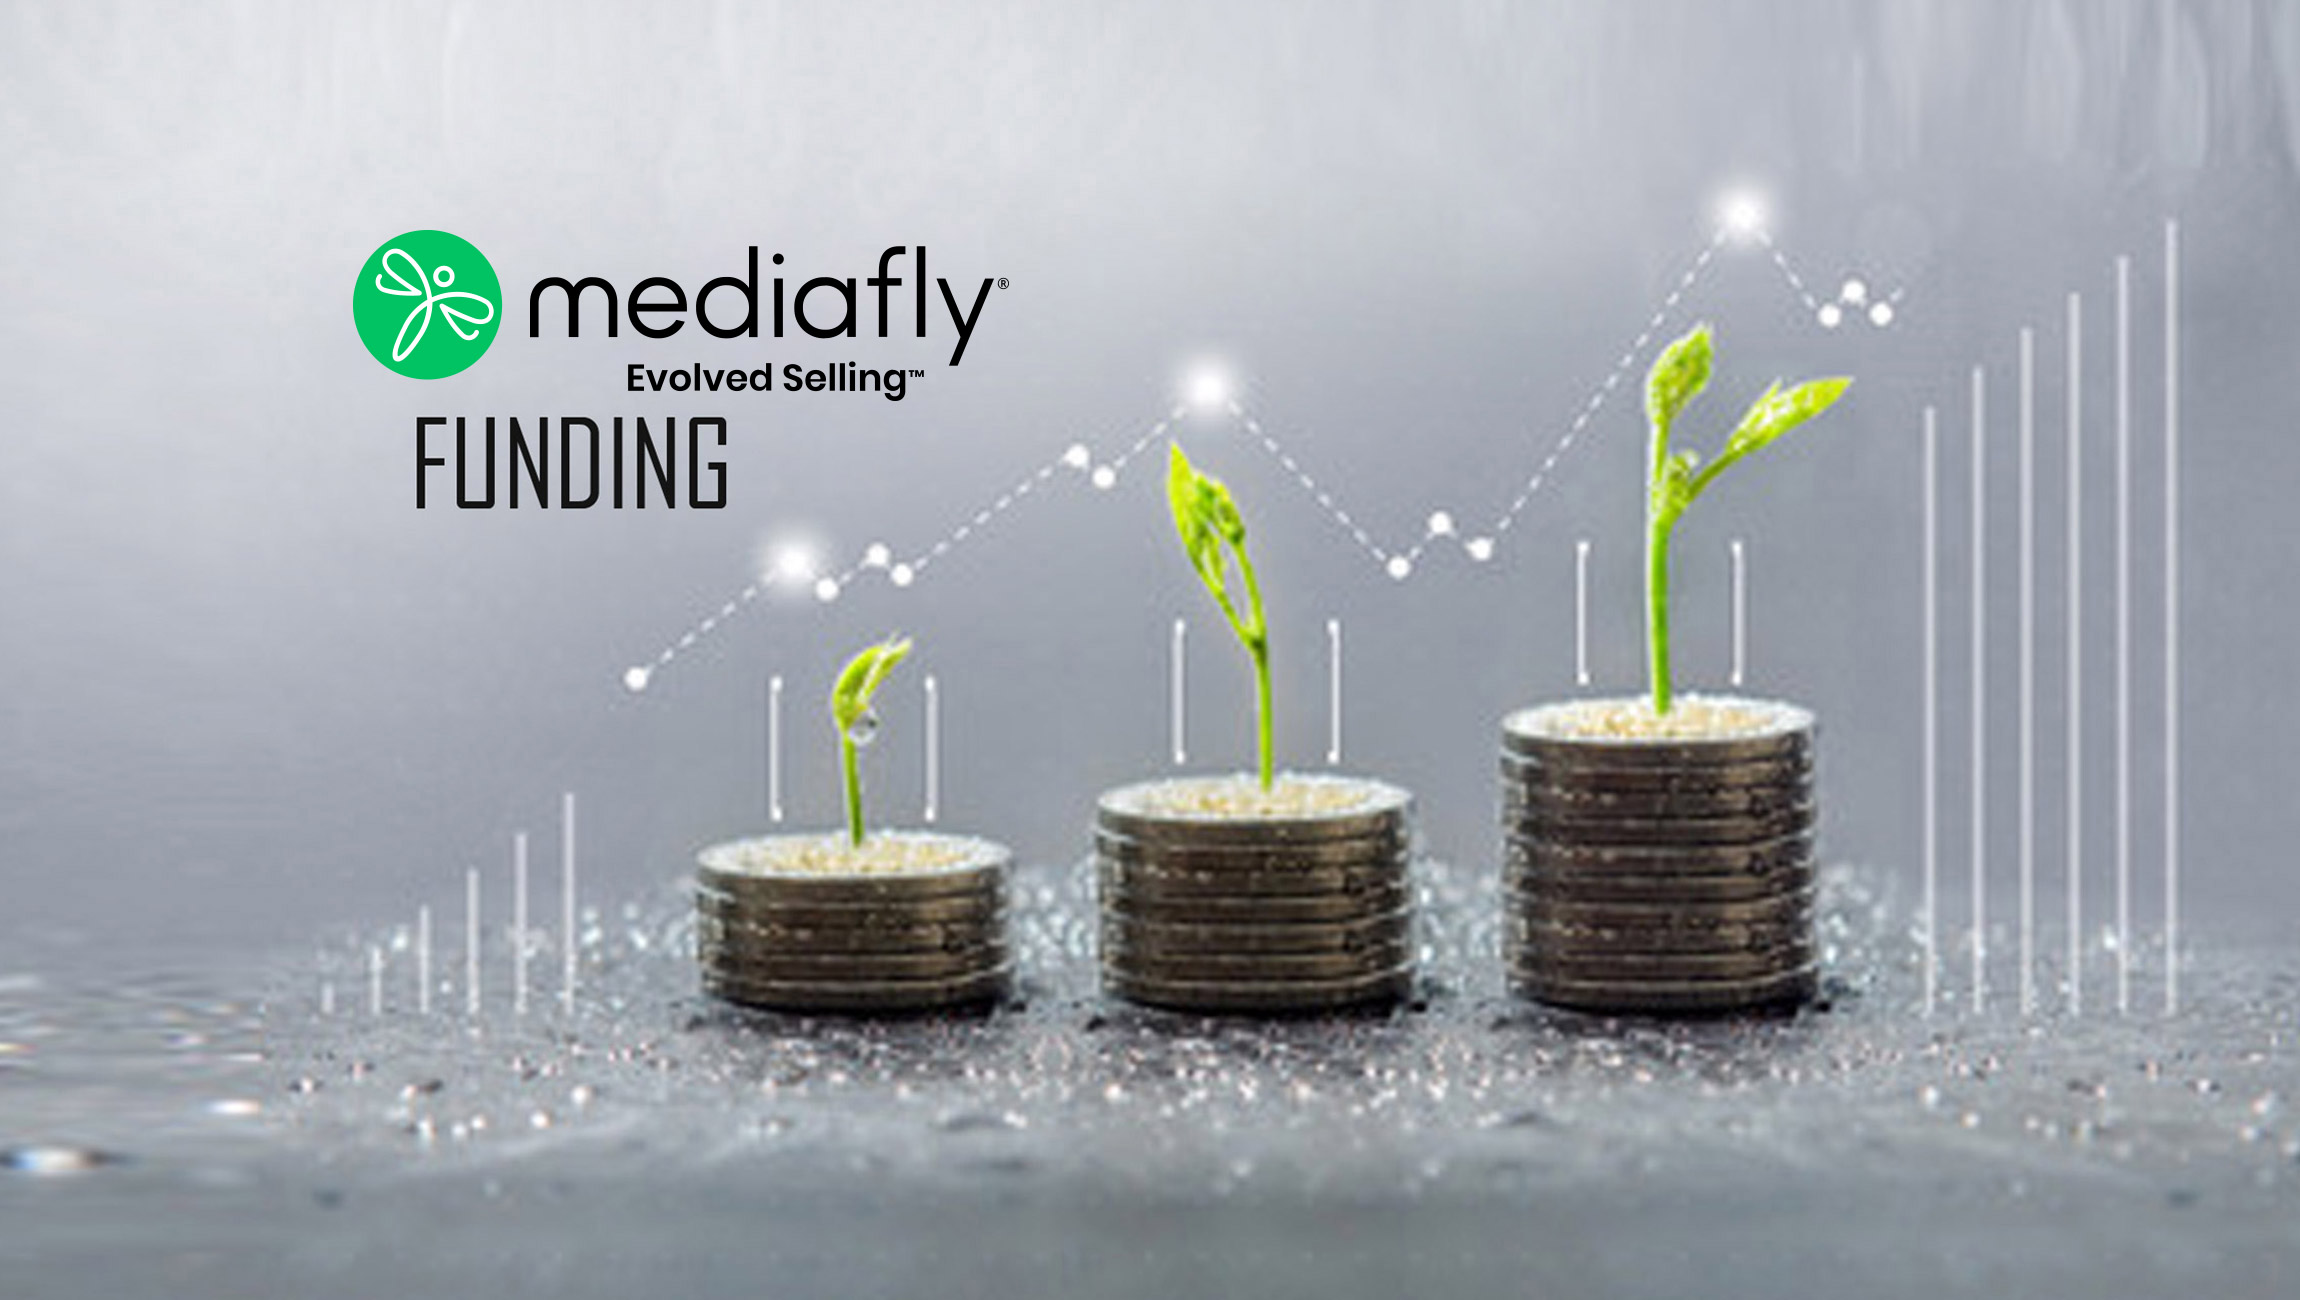 Mediafly Secures $10M Growth Funding, Brings 2021 Total to over $35M